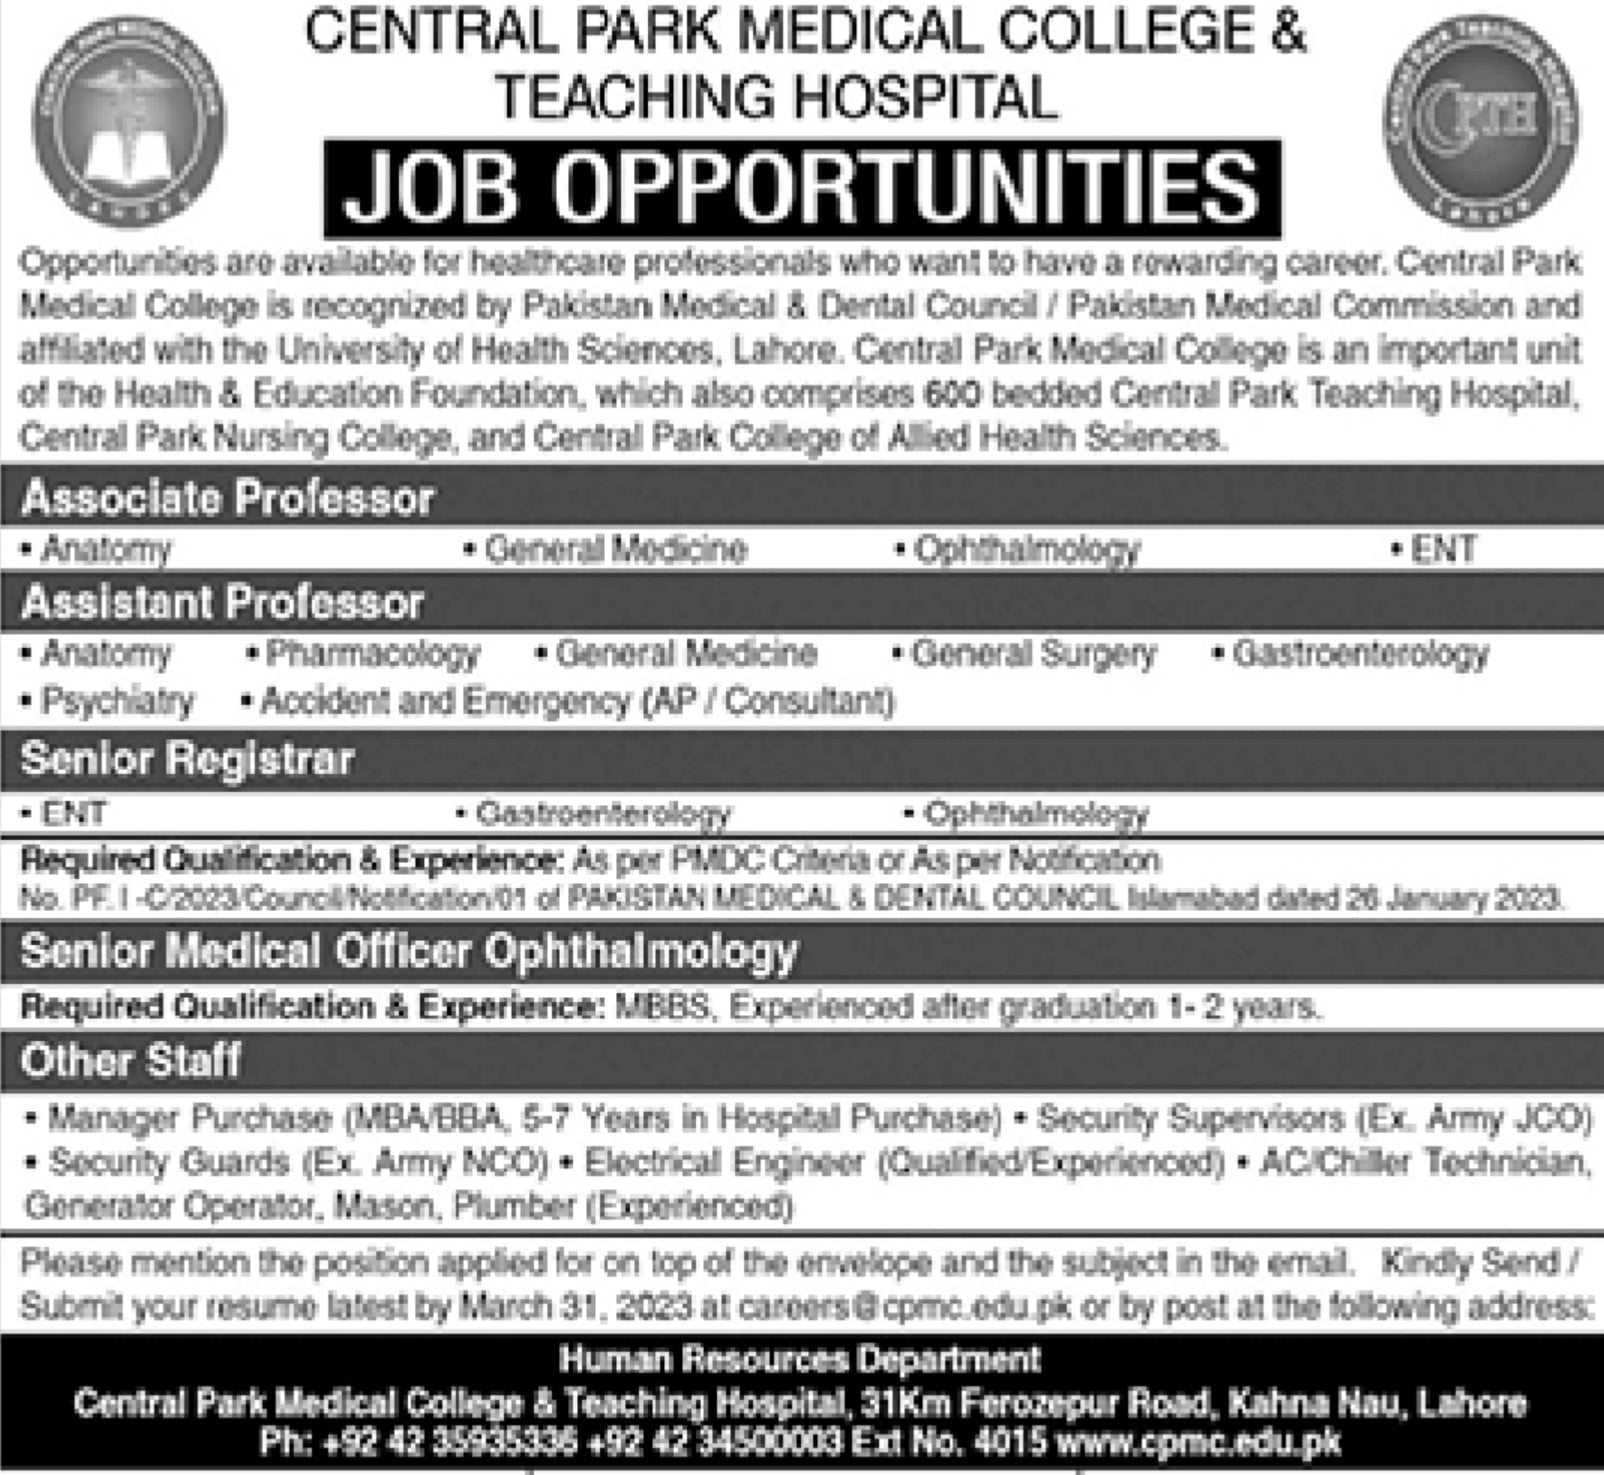 JOBS IN CENTRRAL PARK MEDICAL COLLEGE & TEACHING HOSPITAL 2023